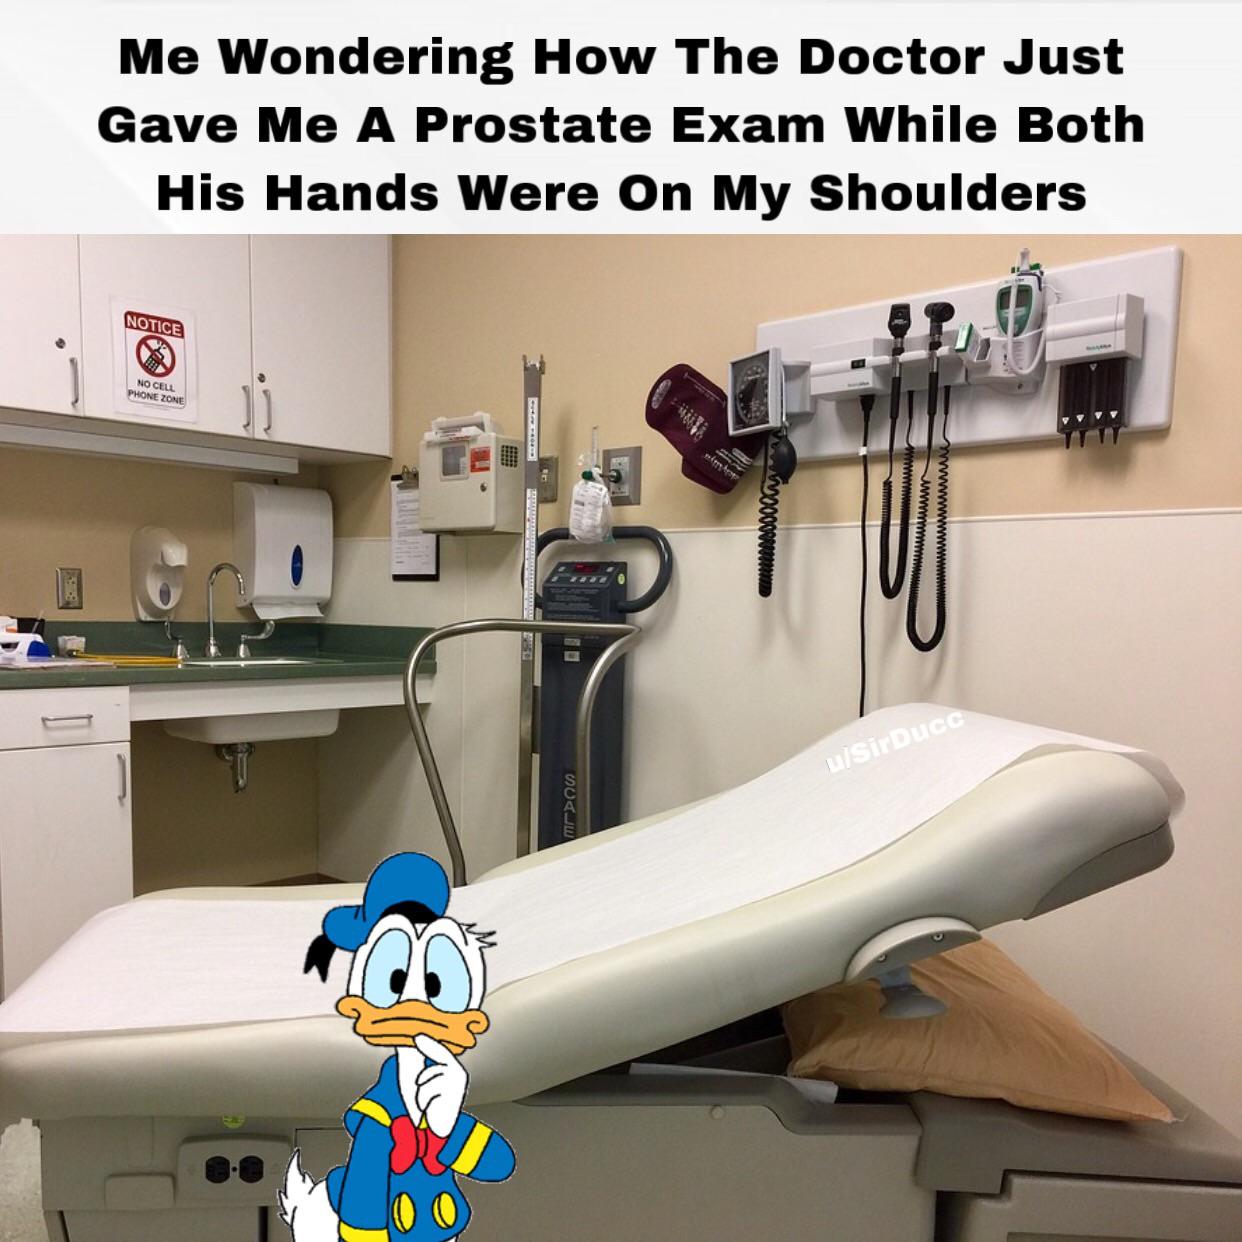 medical offices - Me Wondering How The Doctor Just Gave Me A Prostate Exam While Both His Hands Were On My Shoulders Notice No Cell Phone Zone